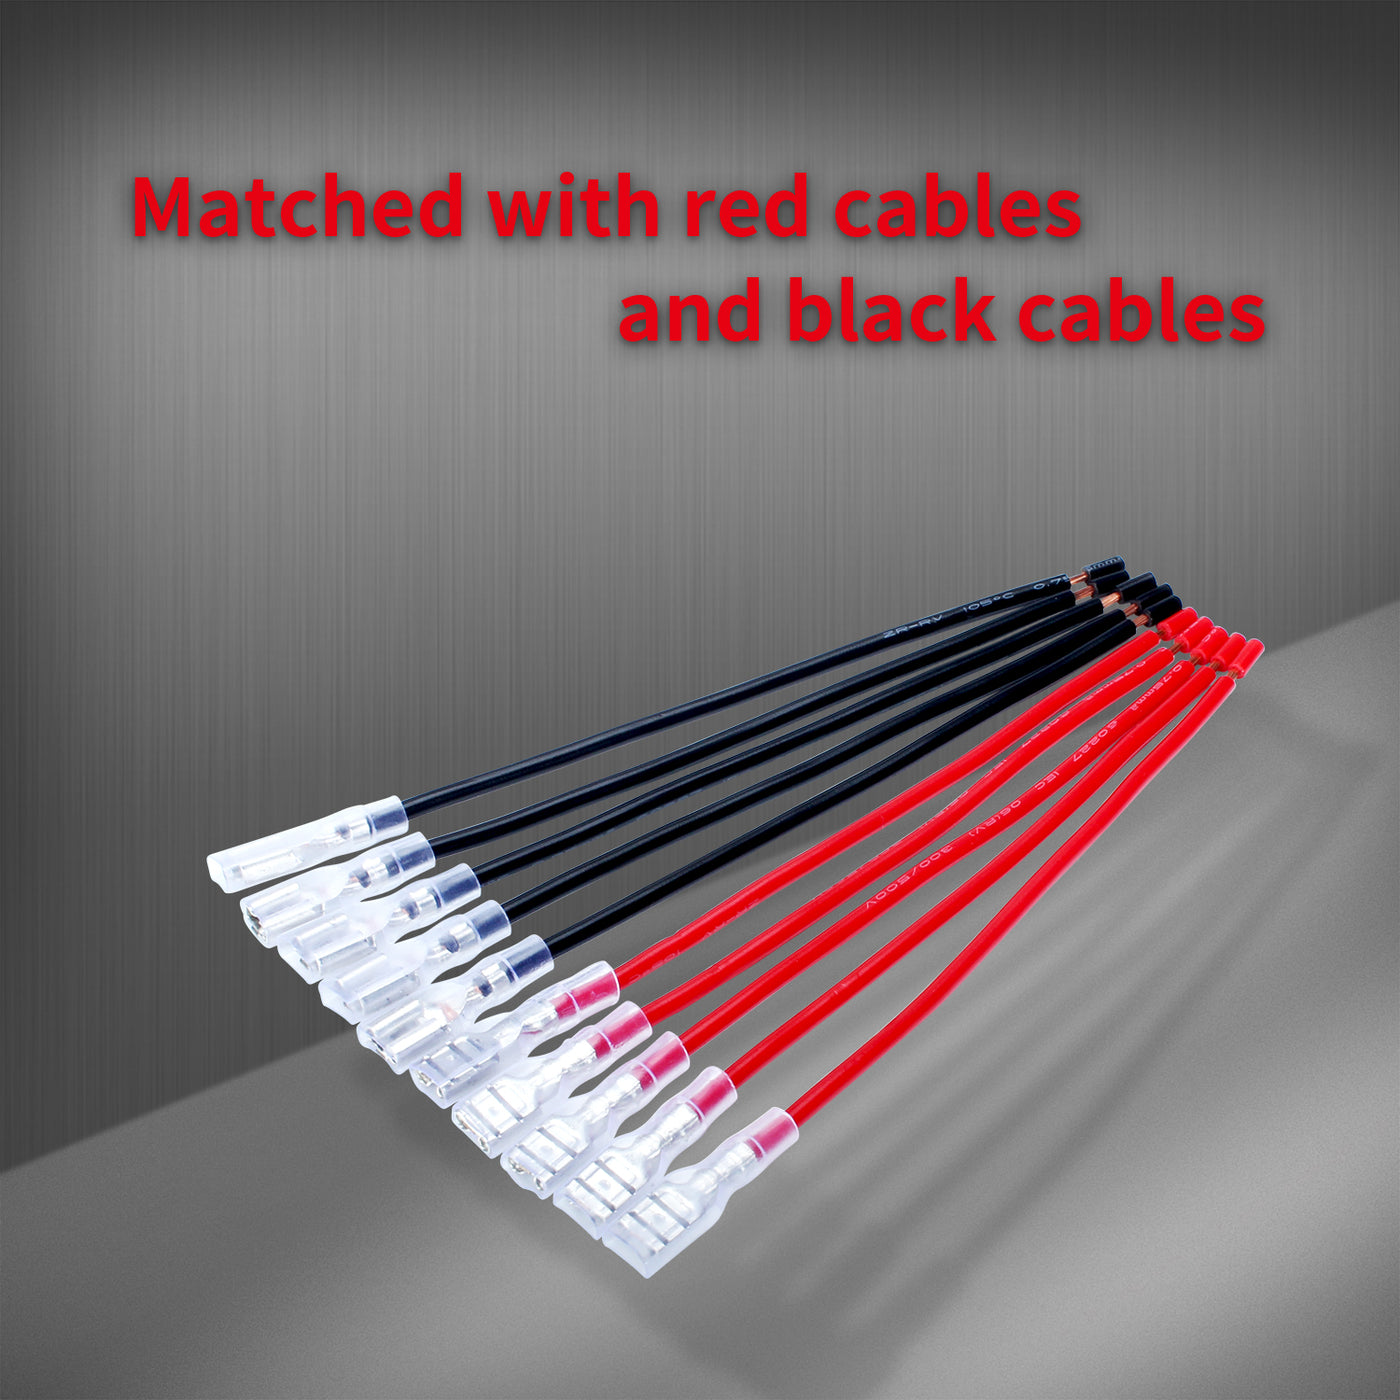 KCD1-5-101 12V Round Rocker Switch with Black nd Red Wires